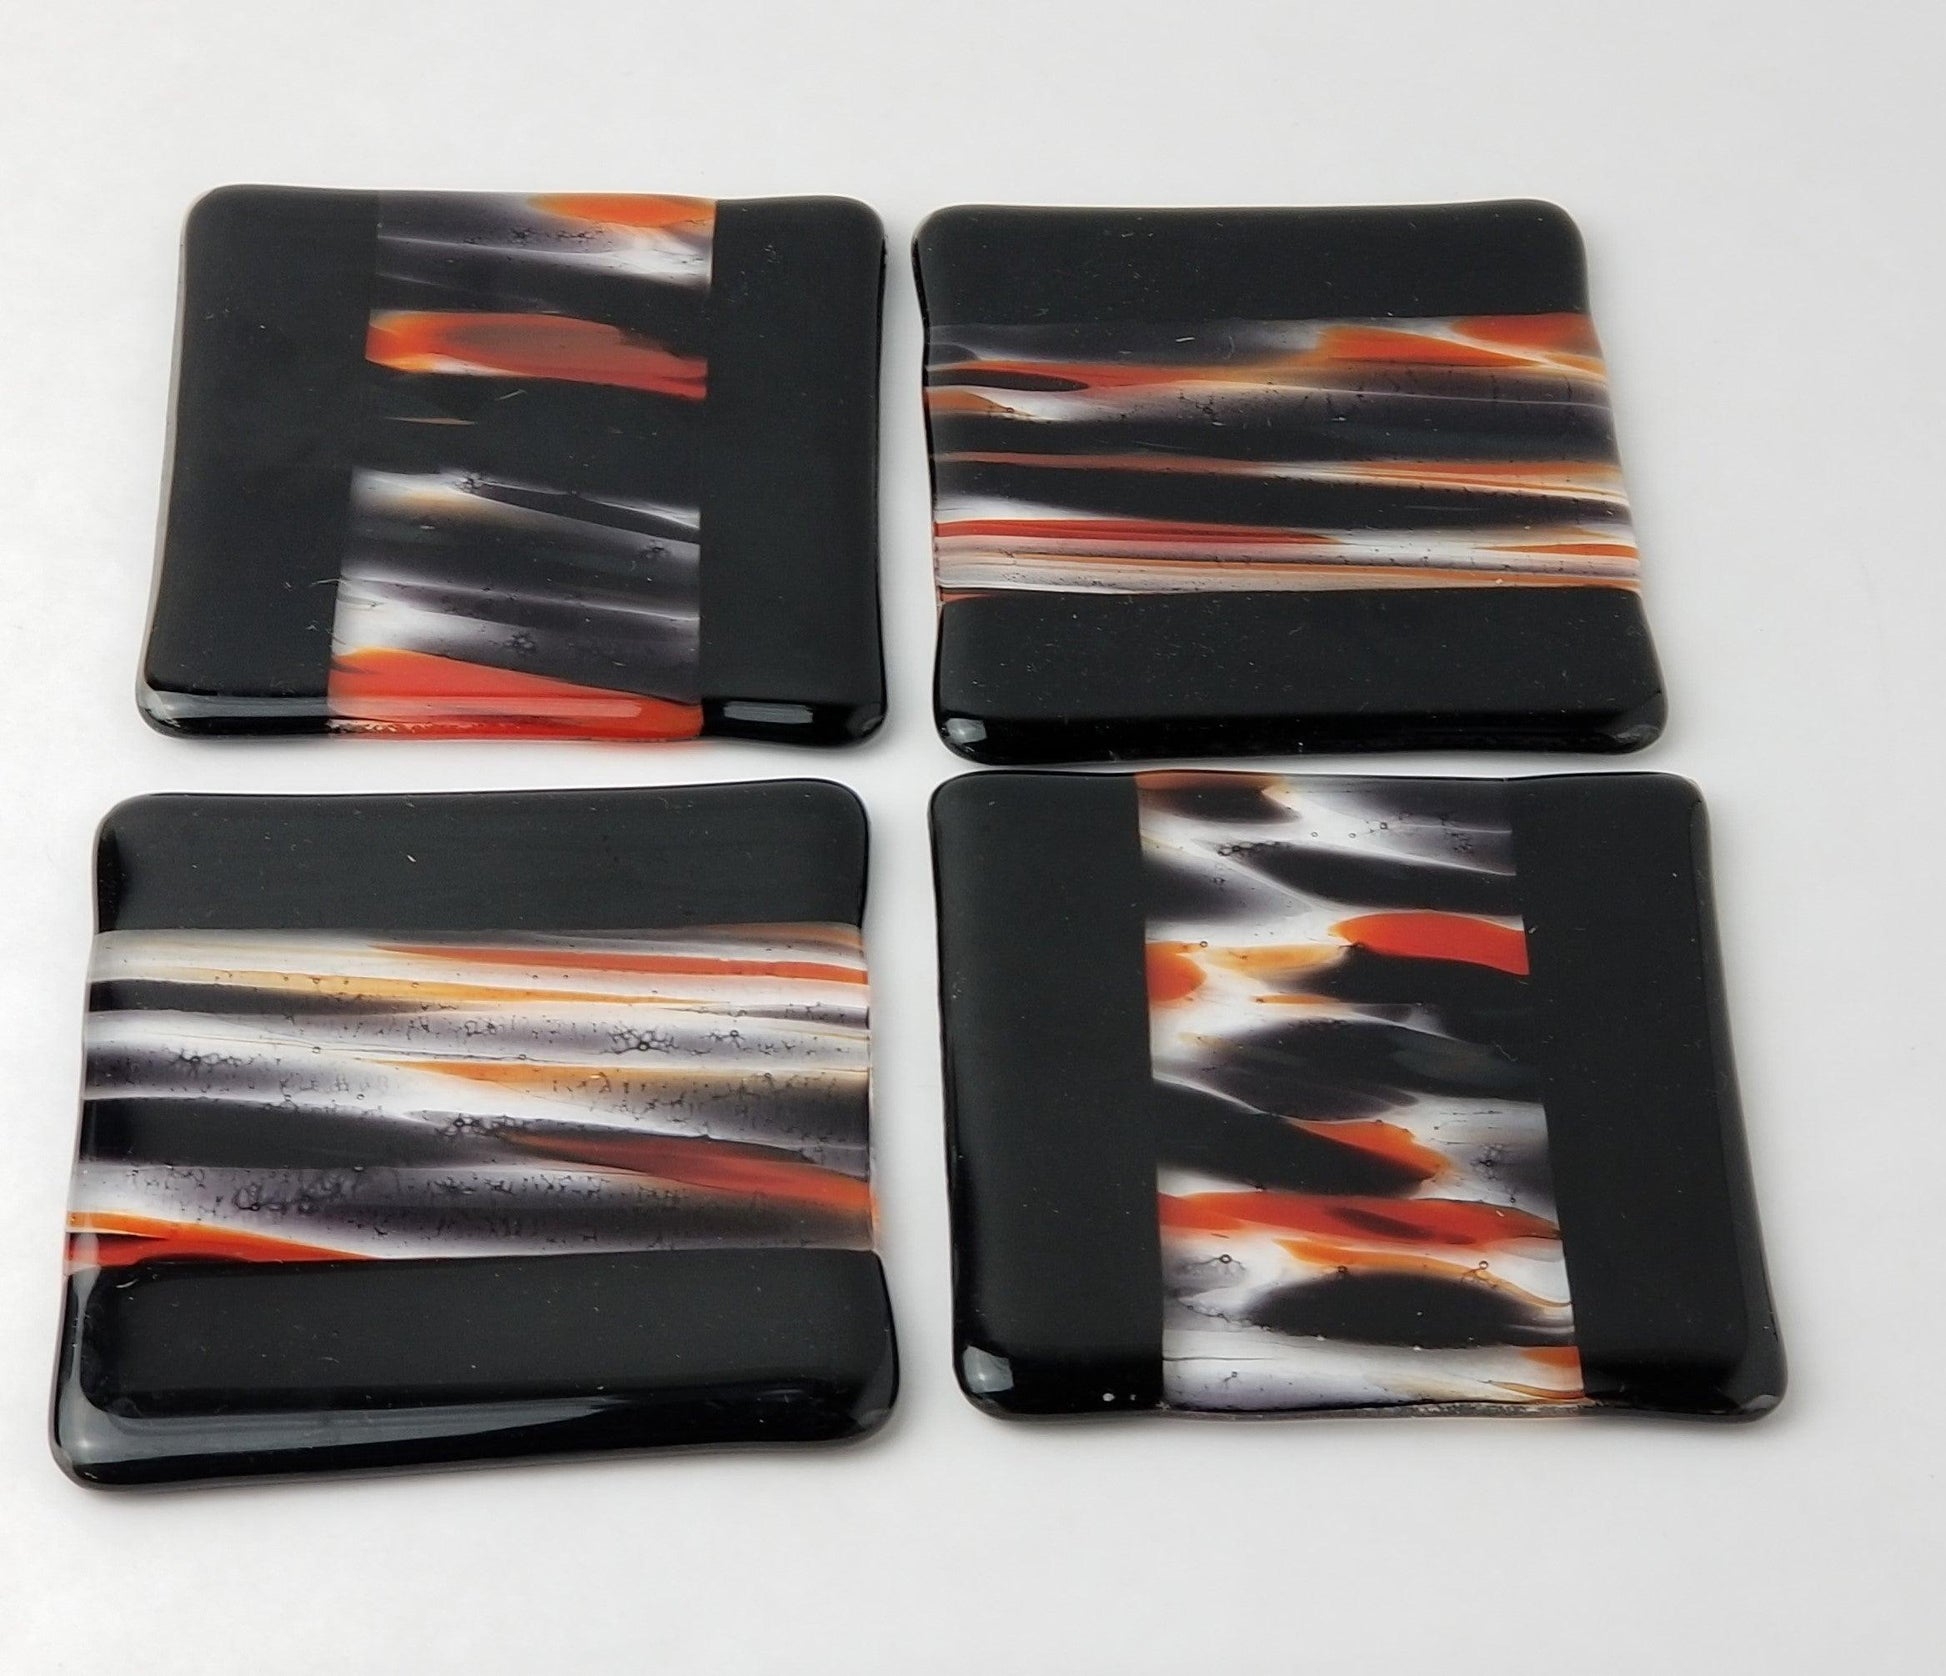 Black and red swirl fused glass coasters, set of 4. From Seeds Glassworks, seedsglassworks